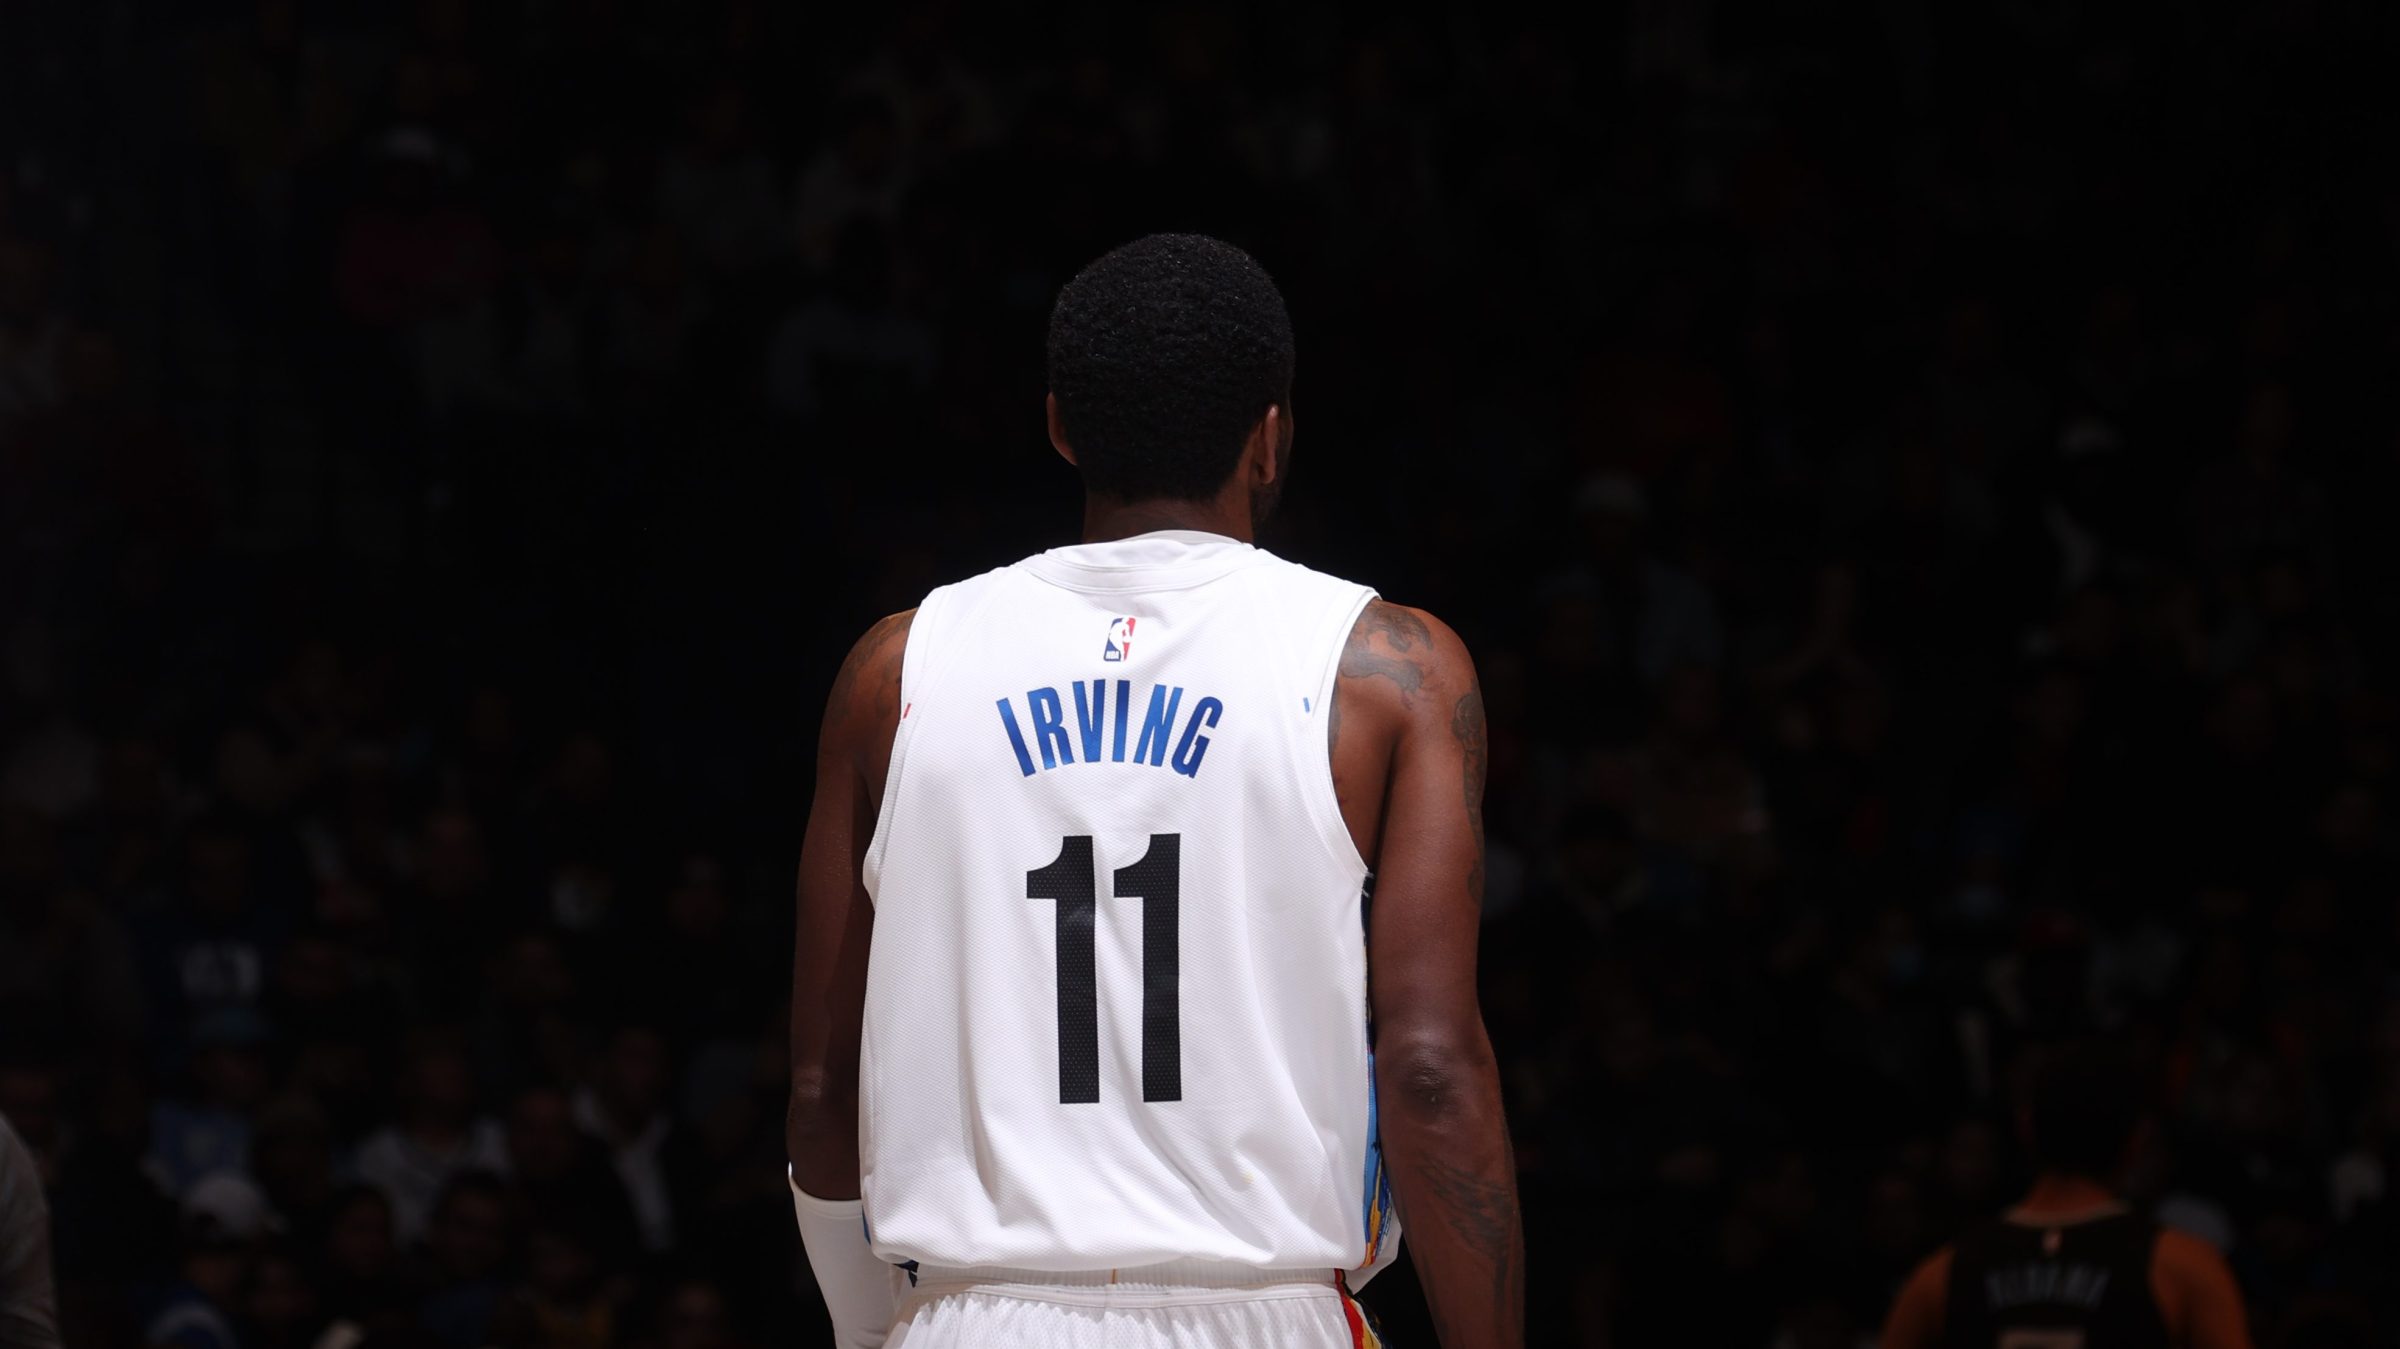 Kyrie Irving #11 of the Brooklyn Nets looks on during the game against the Memphis Grizzlies on November 20, 2022 at Barclays Center in Brooklyn, New York. His back it to the camera, and around him everything else is dark.